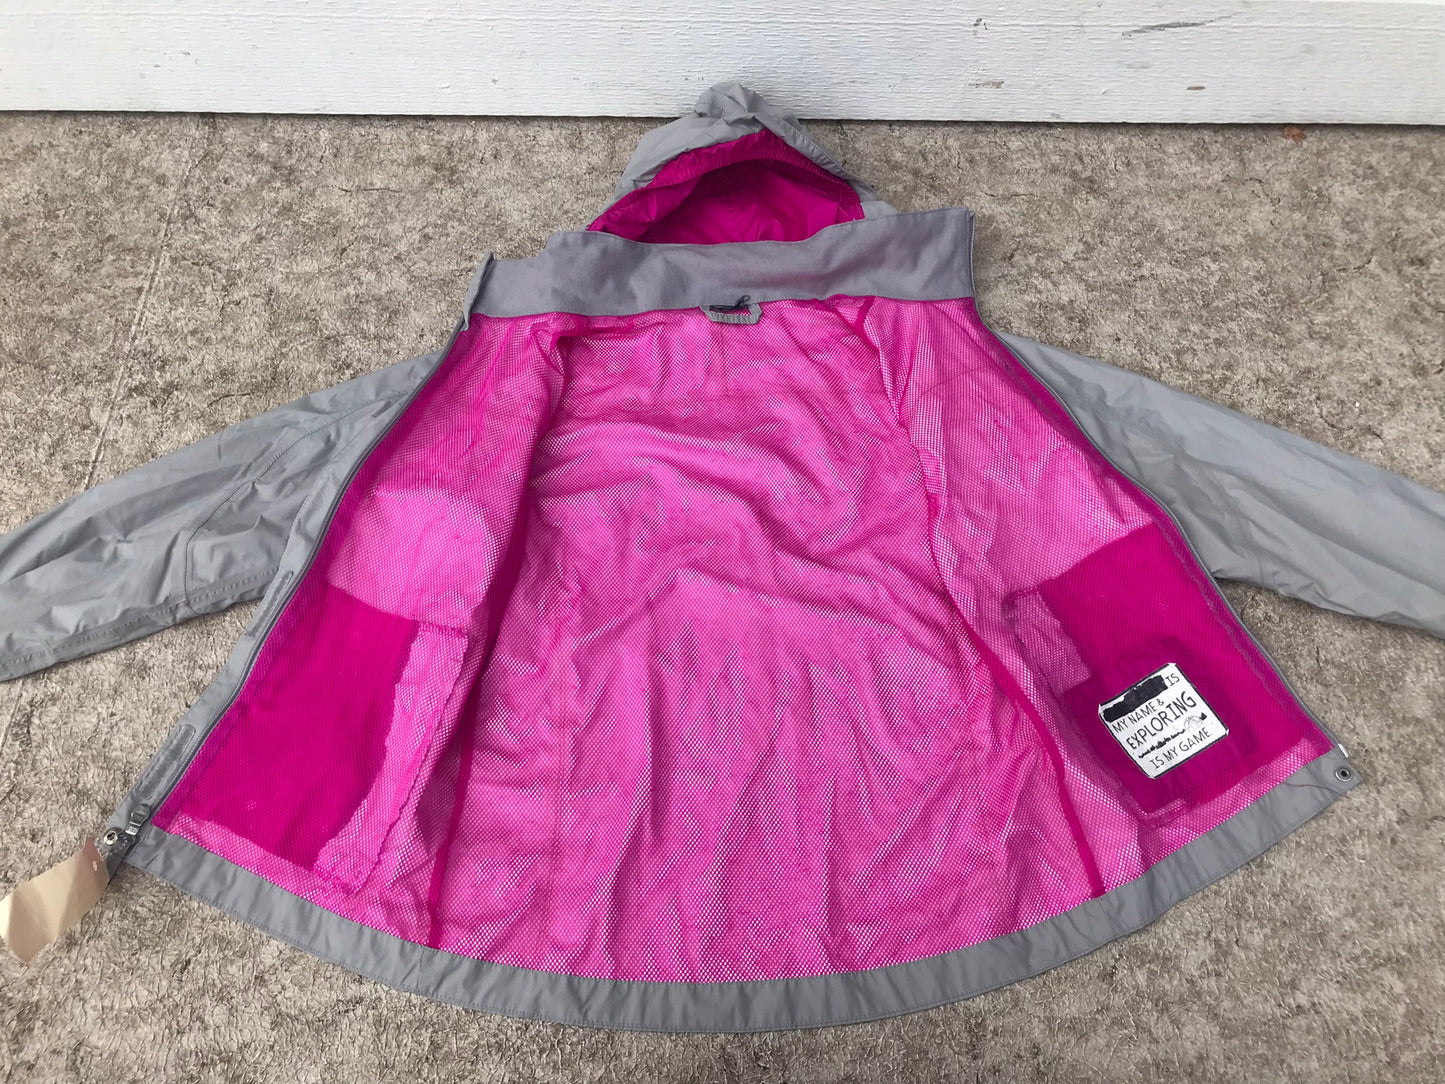 Rain Coat Child Size 8-10 The North Face Grey Pink